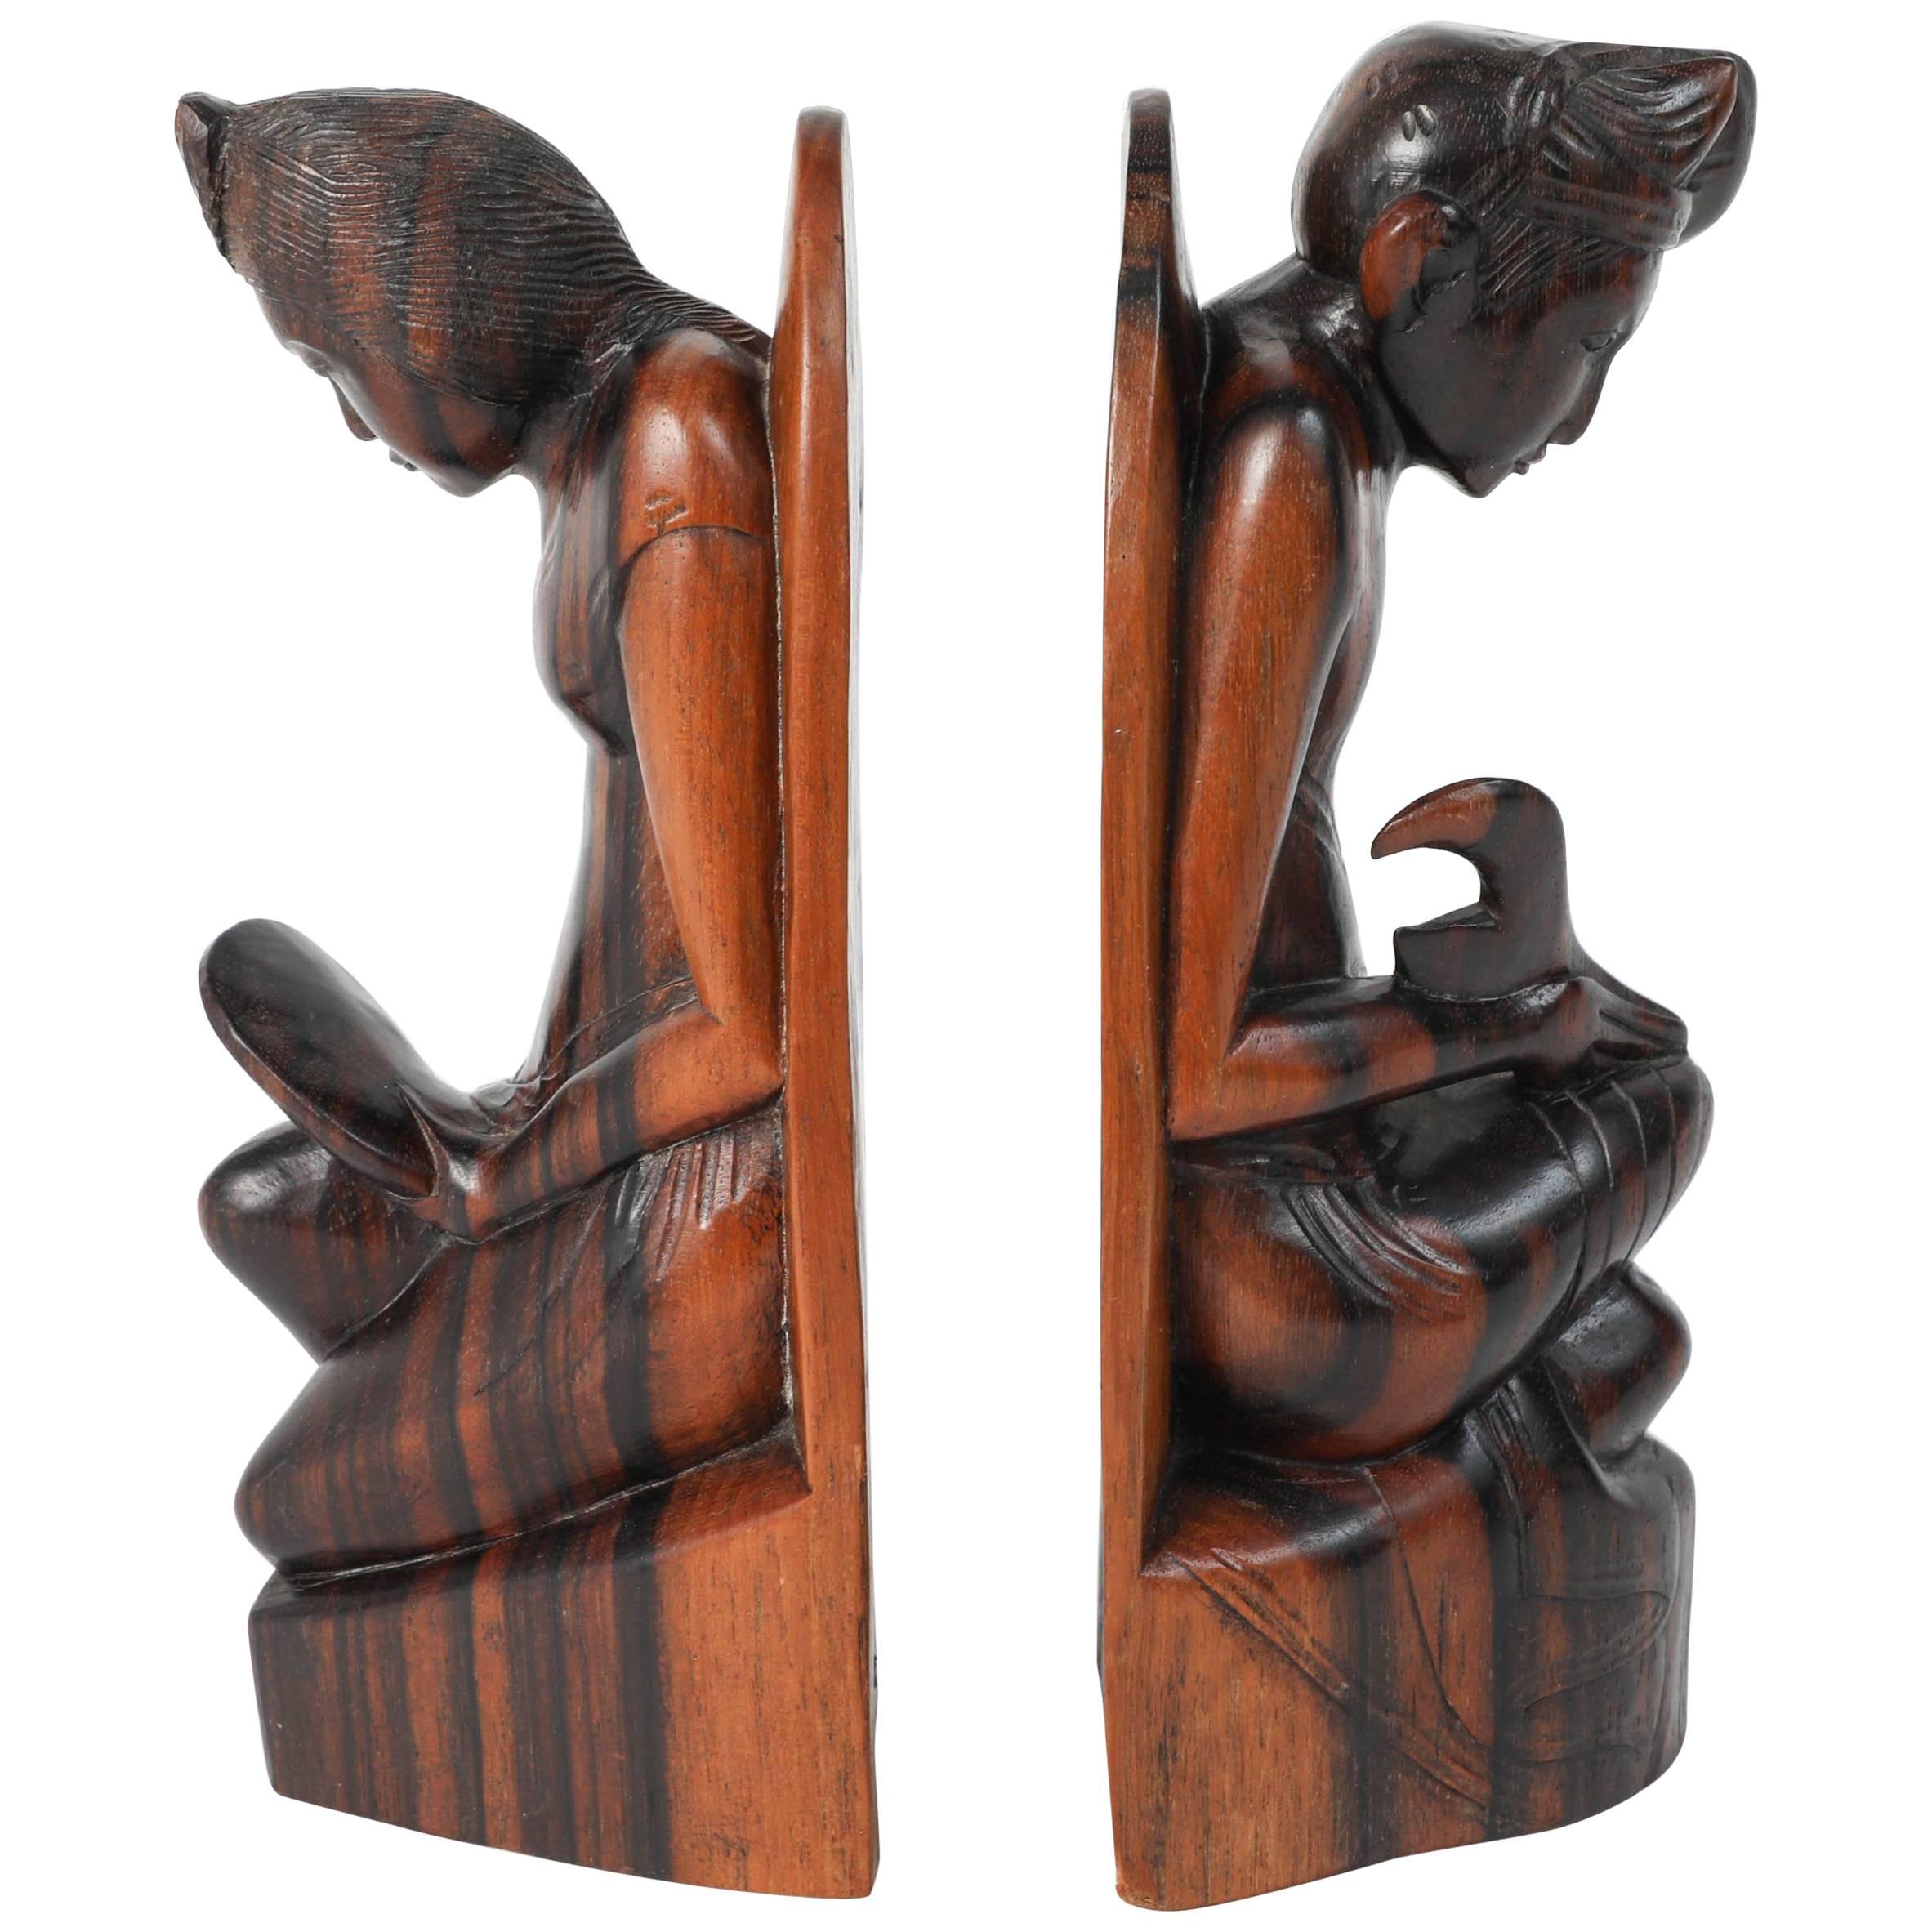 Hand-Carved Wooden Balinese Bookends